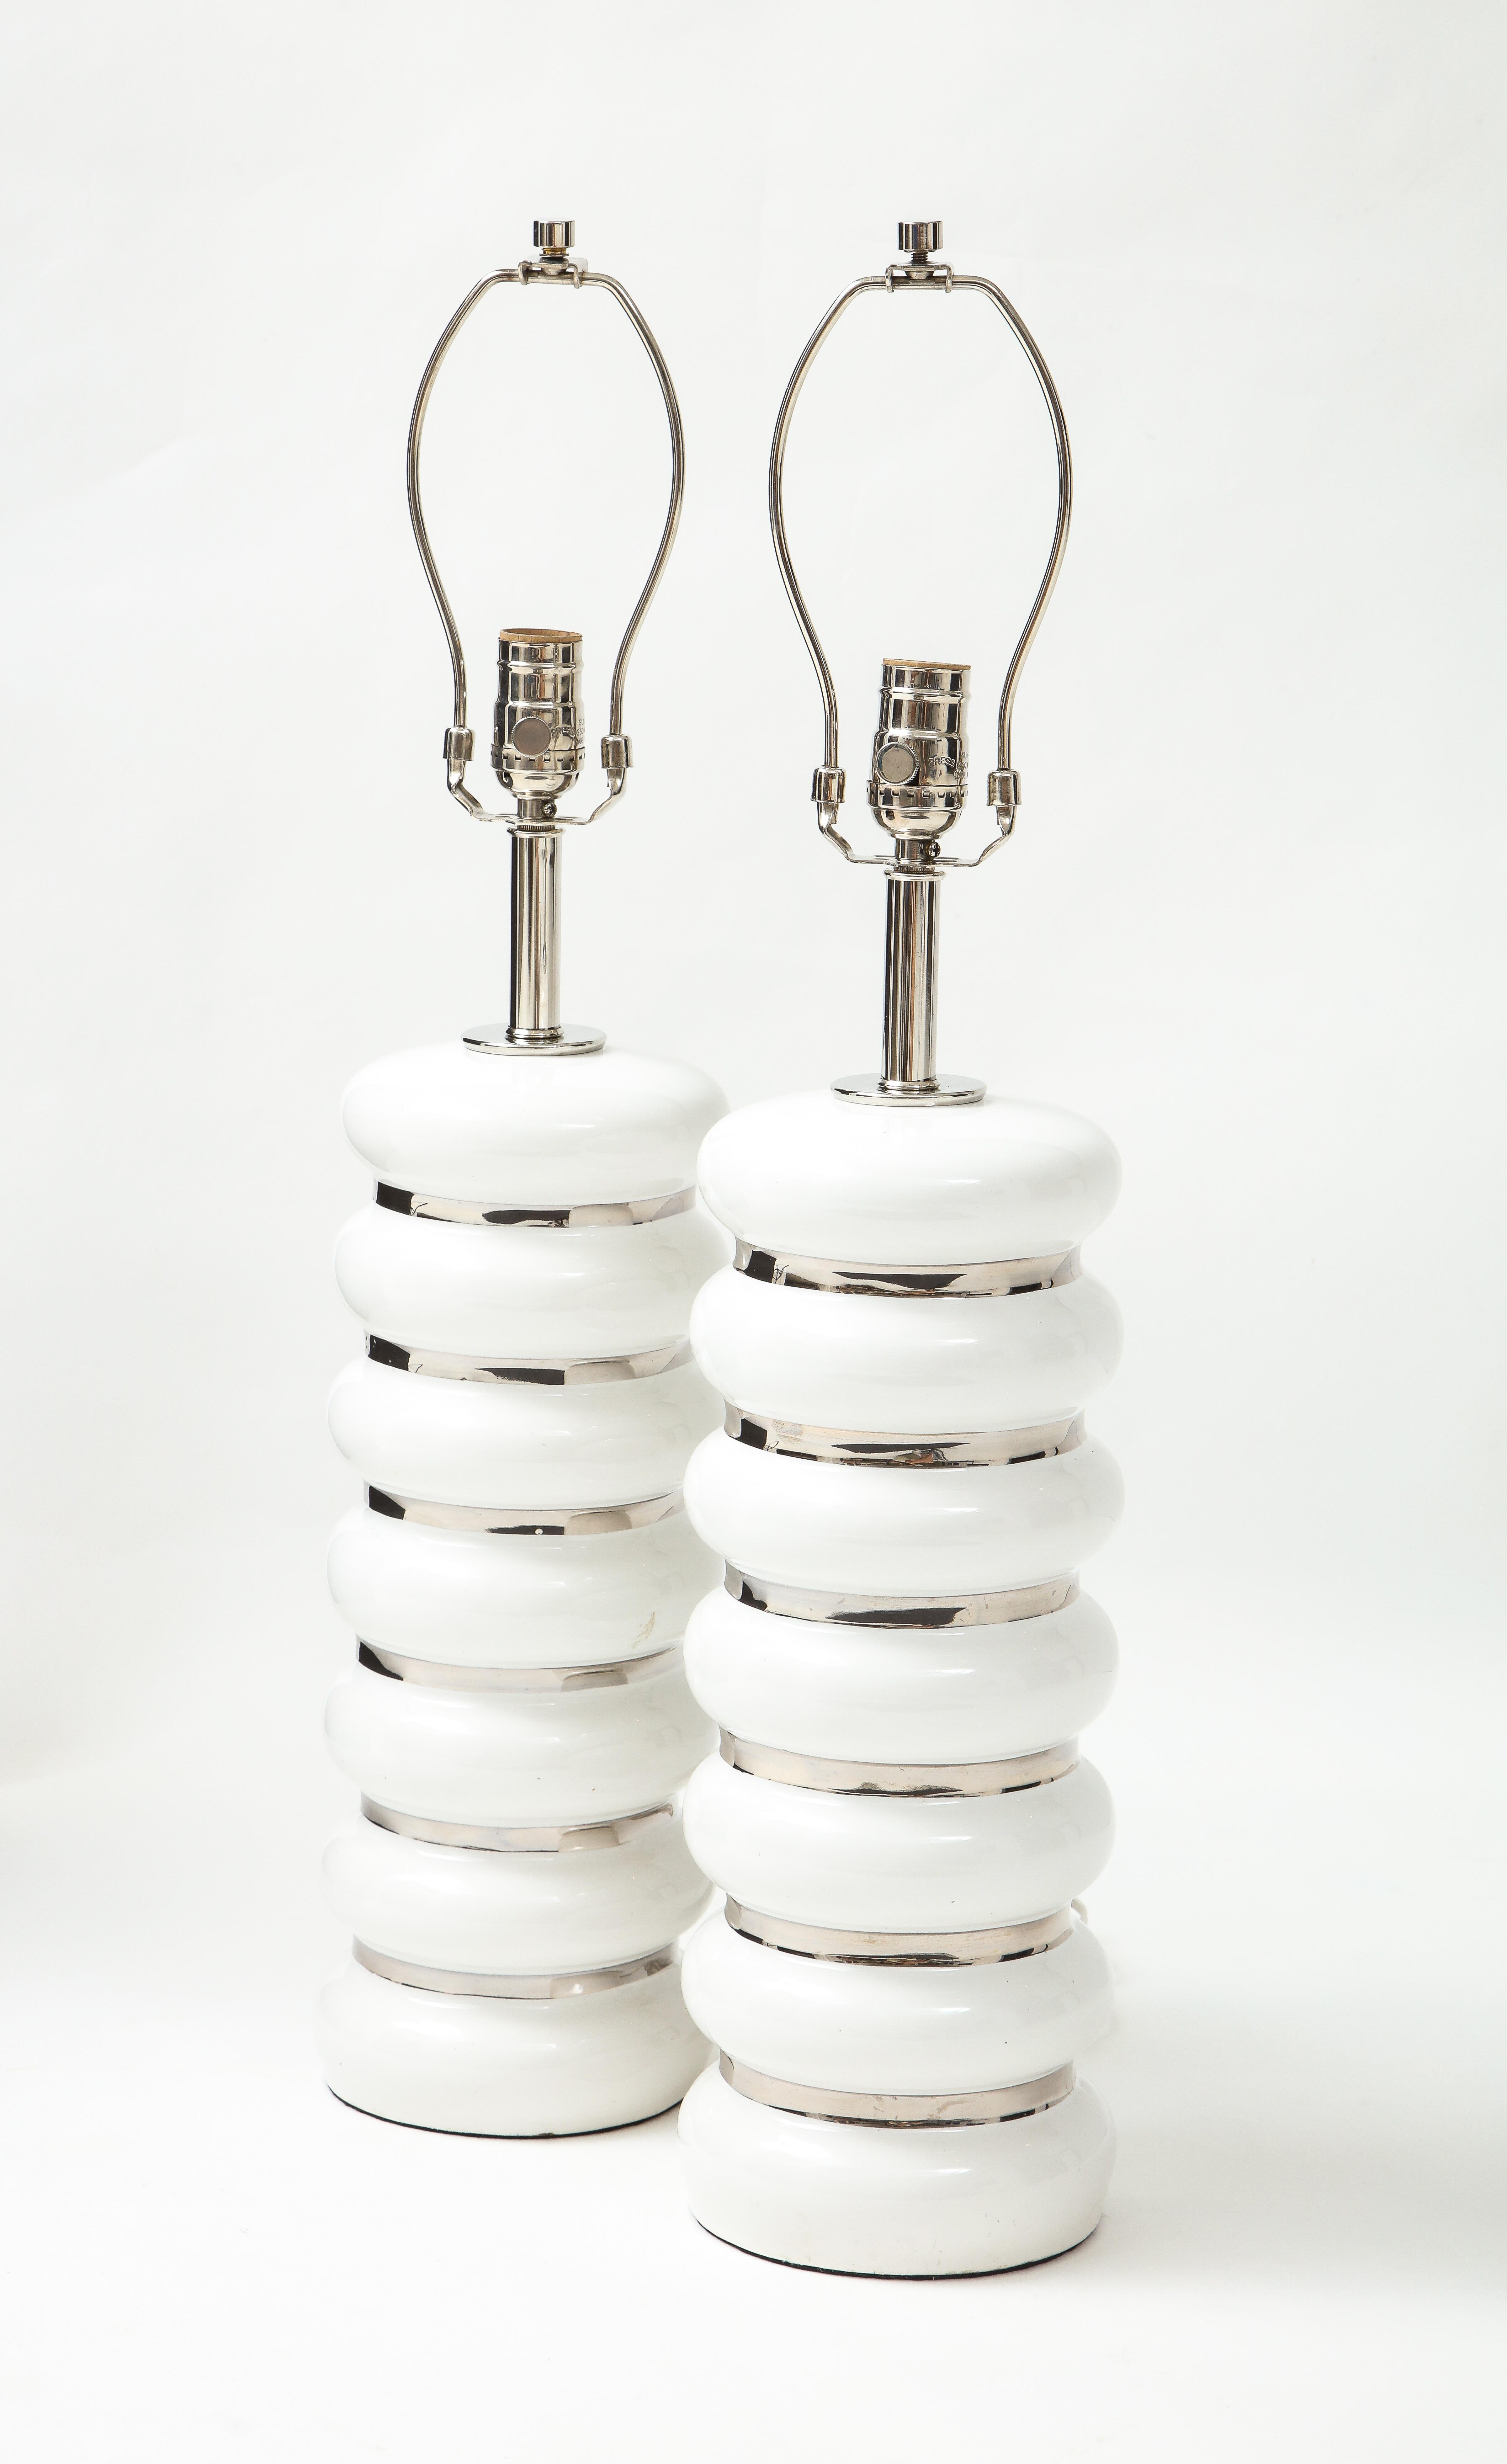 Pair of French Mid-Century Modern white porcelain lamps with hand applied platinum glaze stripes. Rewired for use in the USA using brushed nickel fittings, 100W max.